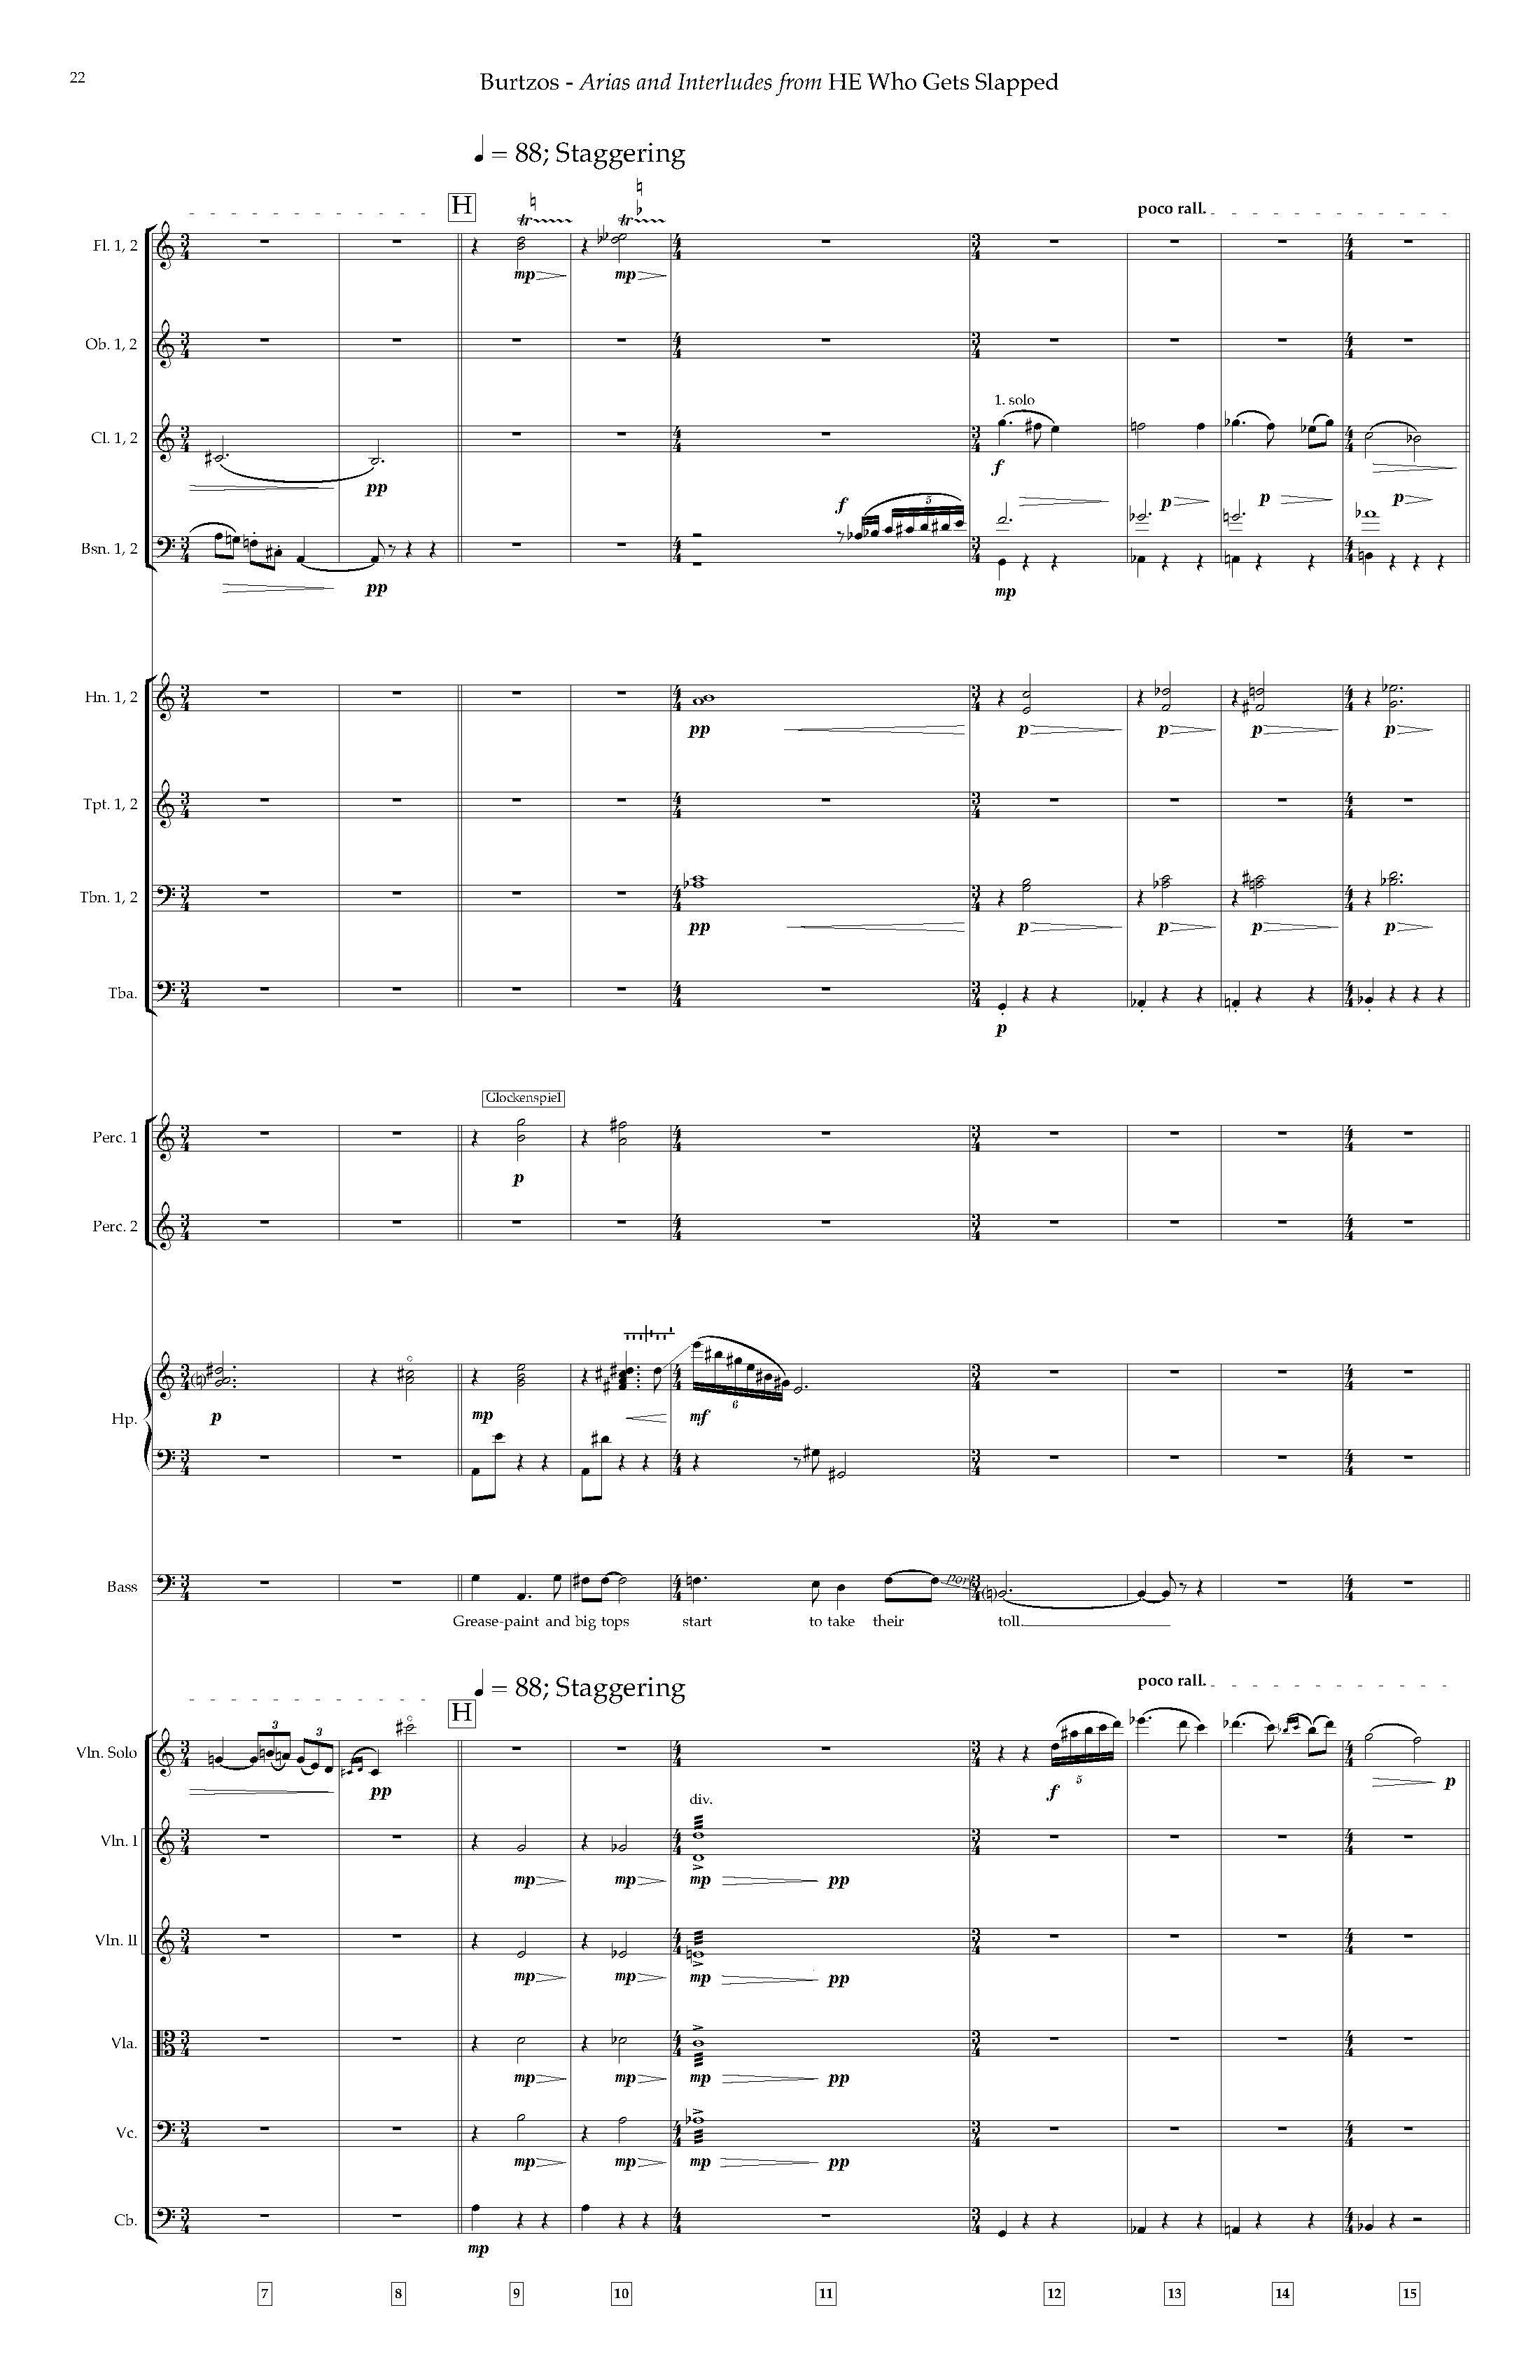 Arias and Interludes from HWGS - Complete Score_Page_28.jpg